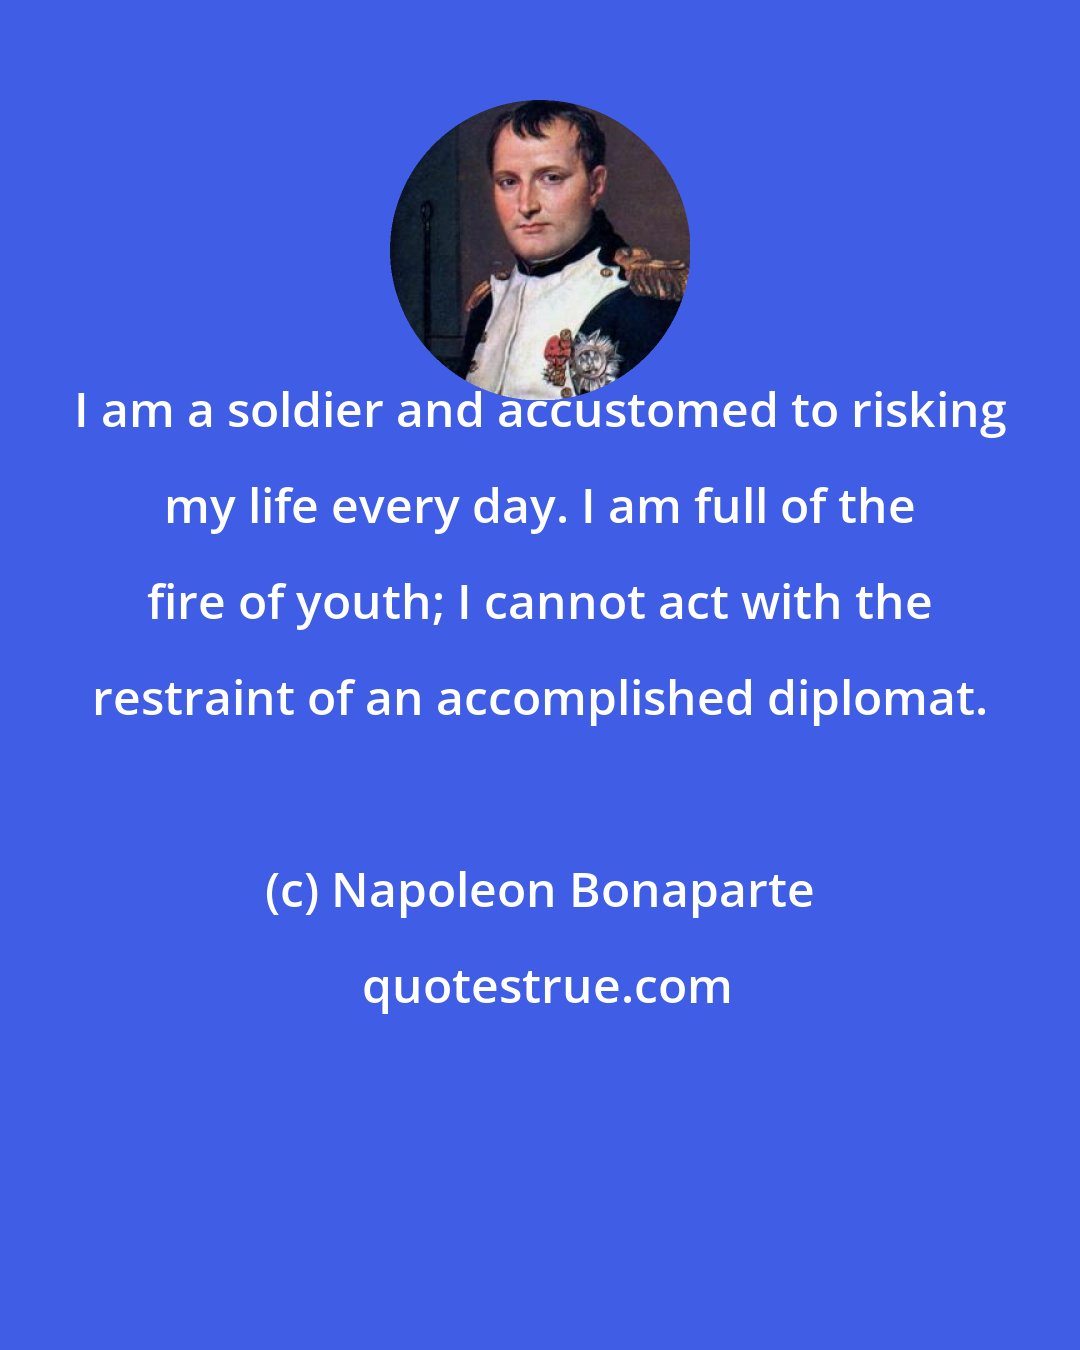 Napoleon Bonaparte: I am a soldier and accustomed to risking my life every day. I am full of the fire of youth; I cannot act with the restraint of an accomplished diplomat.